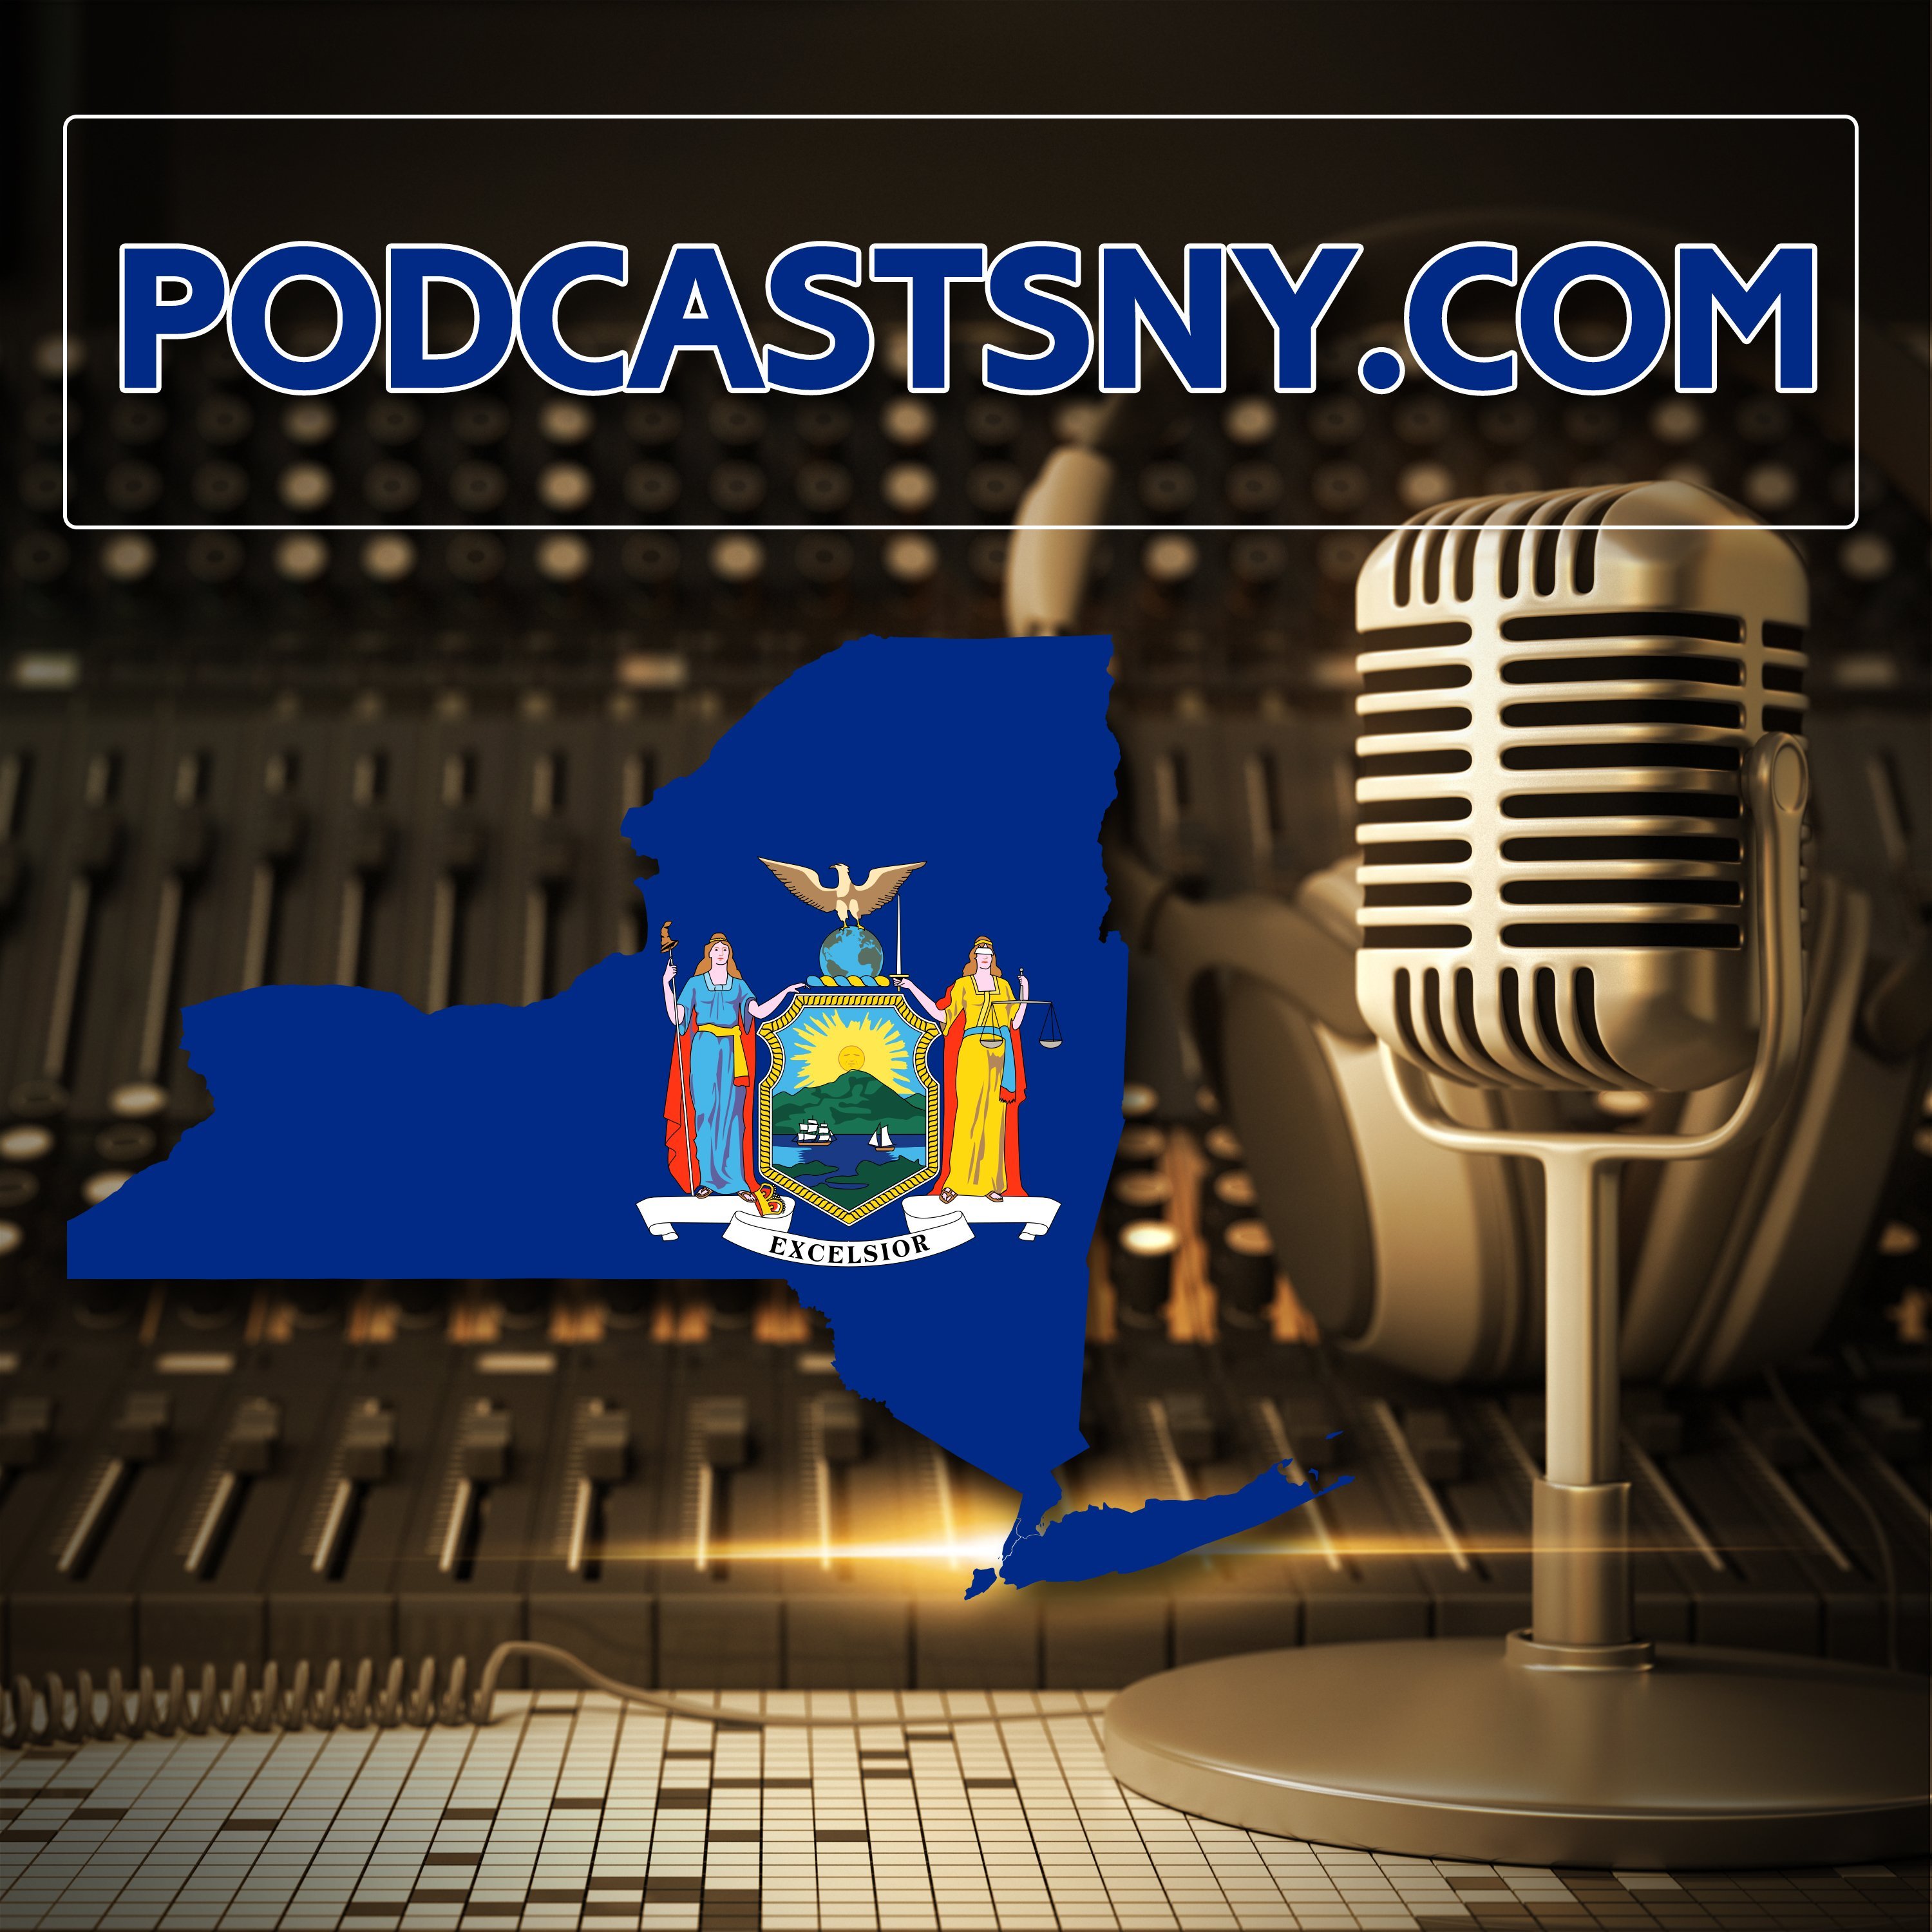 A community of #podcasters creating in #newyork. Have a #podcast you make in NY? Contact us & join the community.